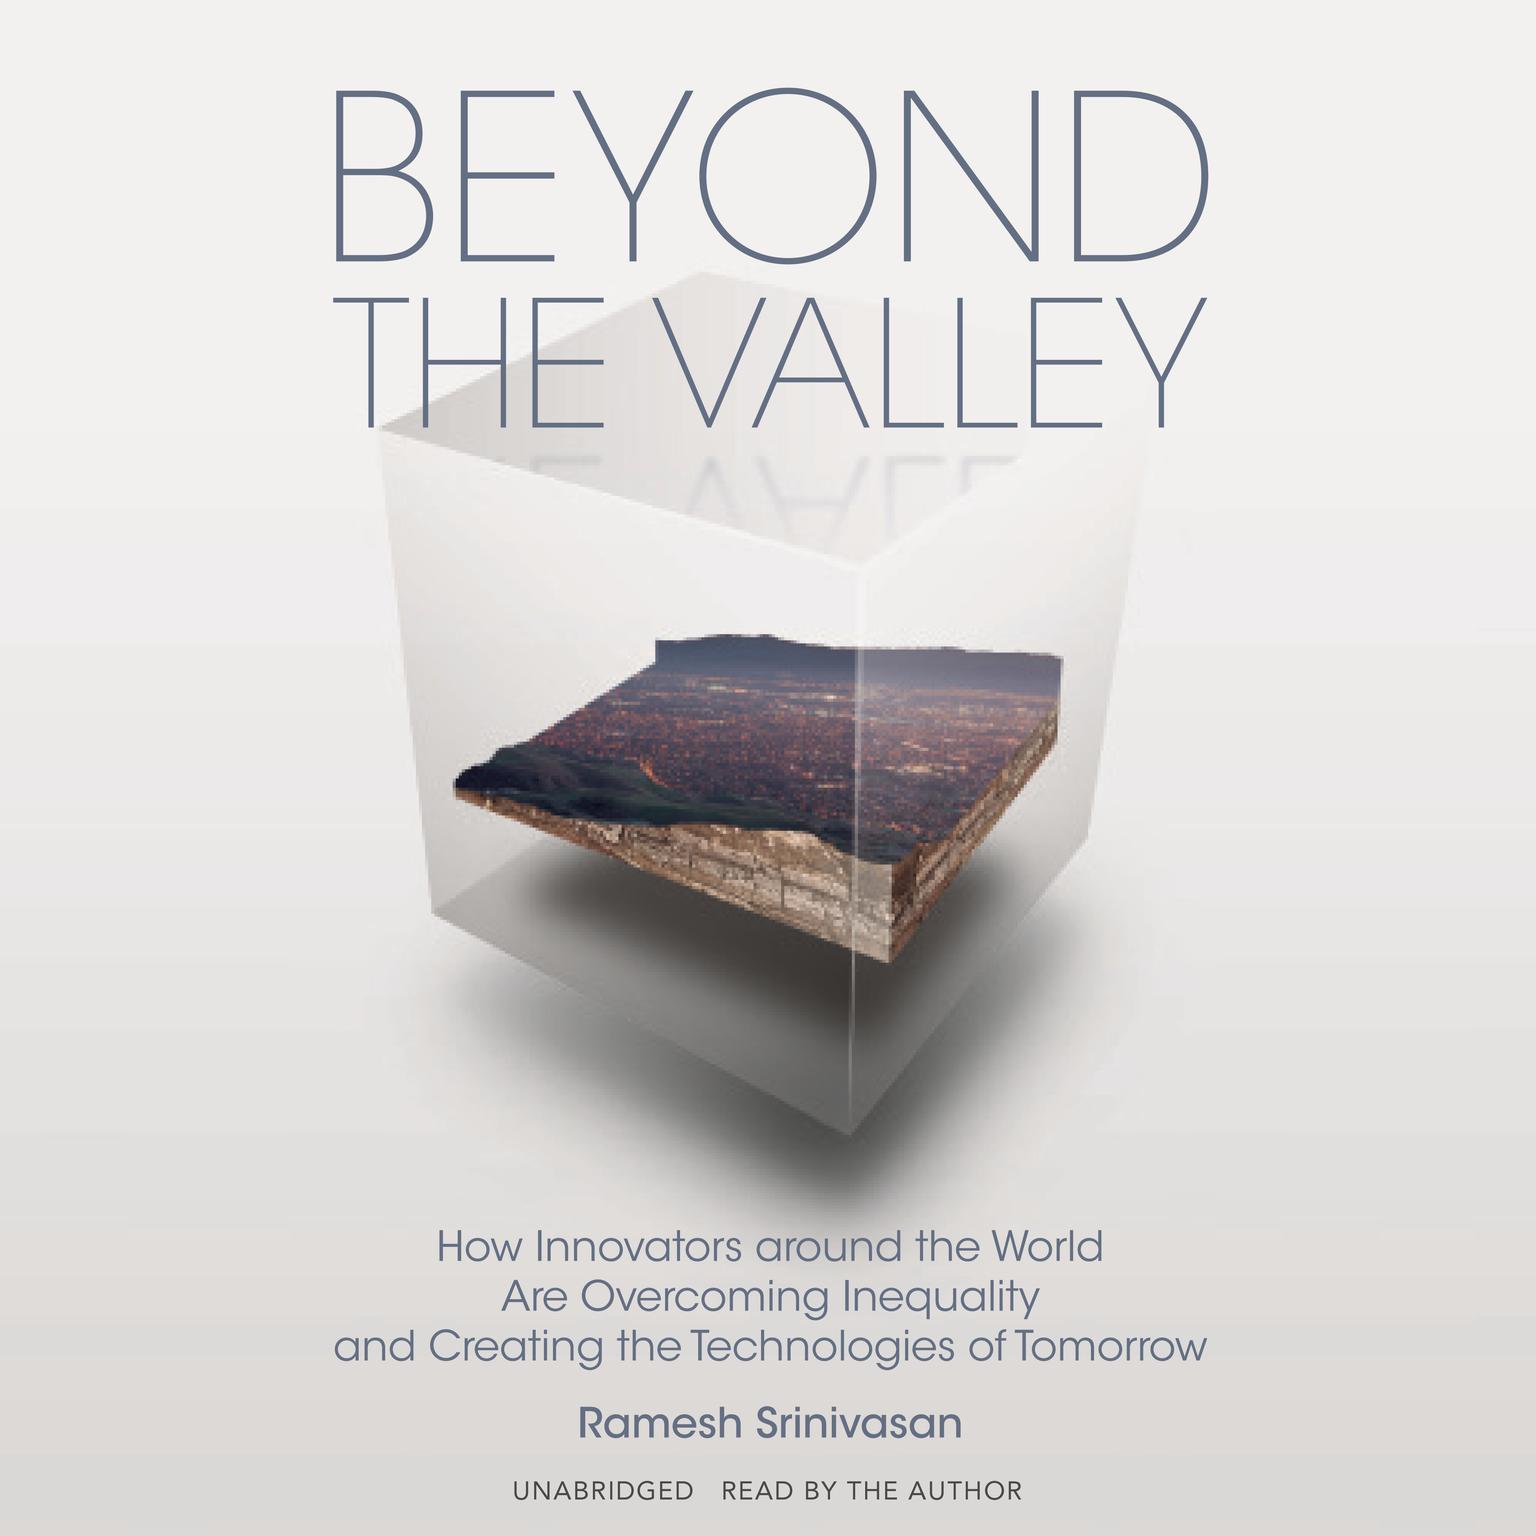 Beyond the Valley: How Innovators around the World Are Overcoming Inequality and Creating the Technologies of Tomorrow Audiobook, by Ramesh Srinivasan